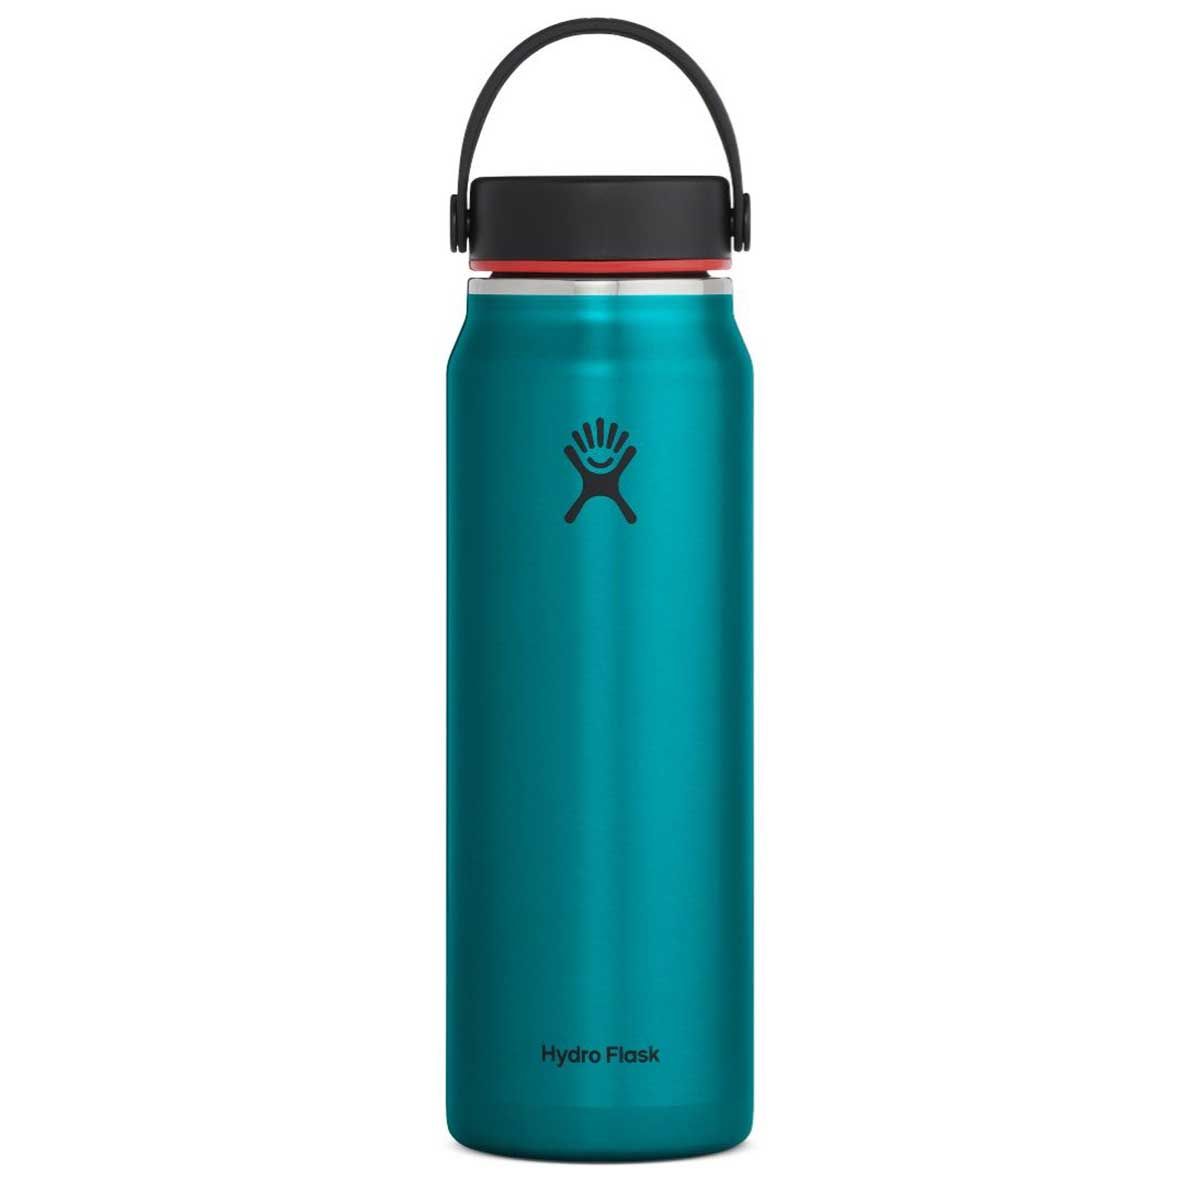 Hydro Flask Trail insulated water bottle - 0.95L